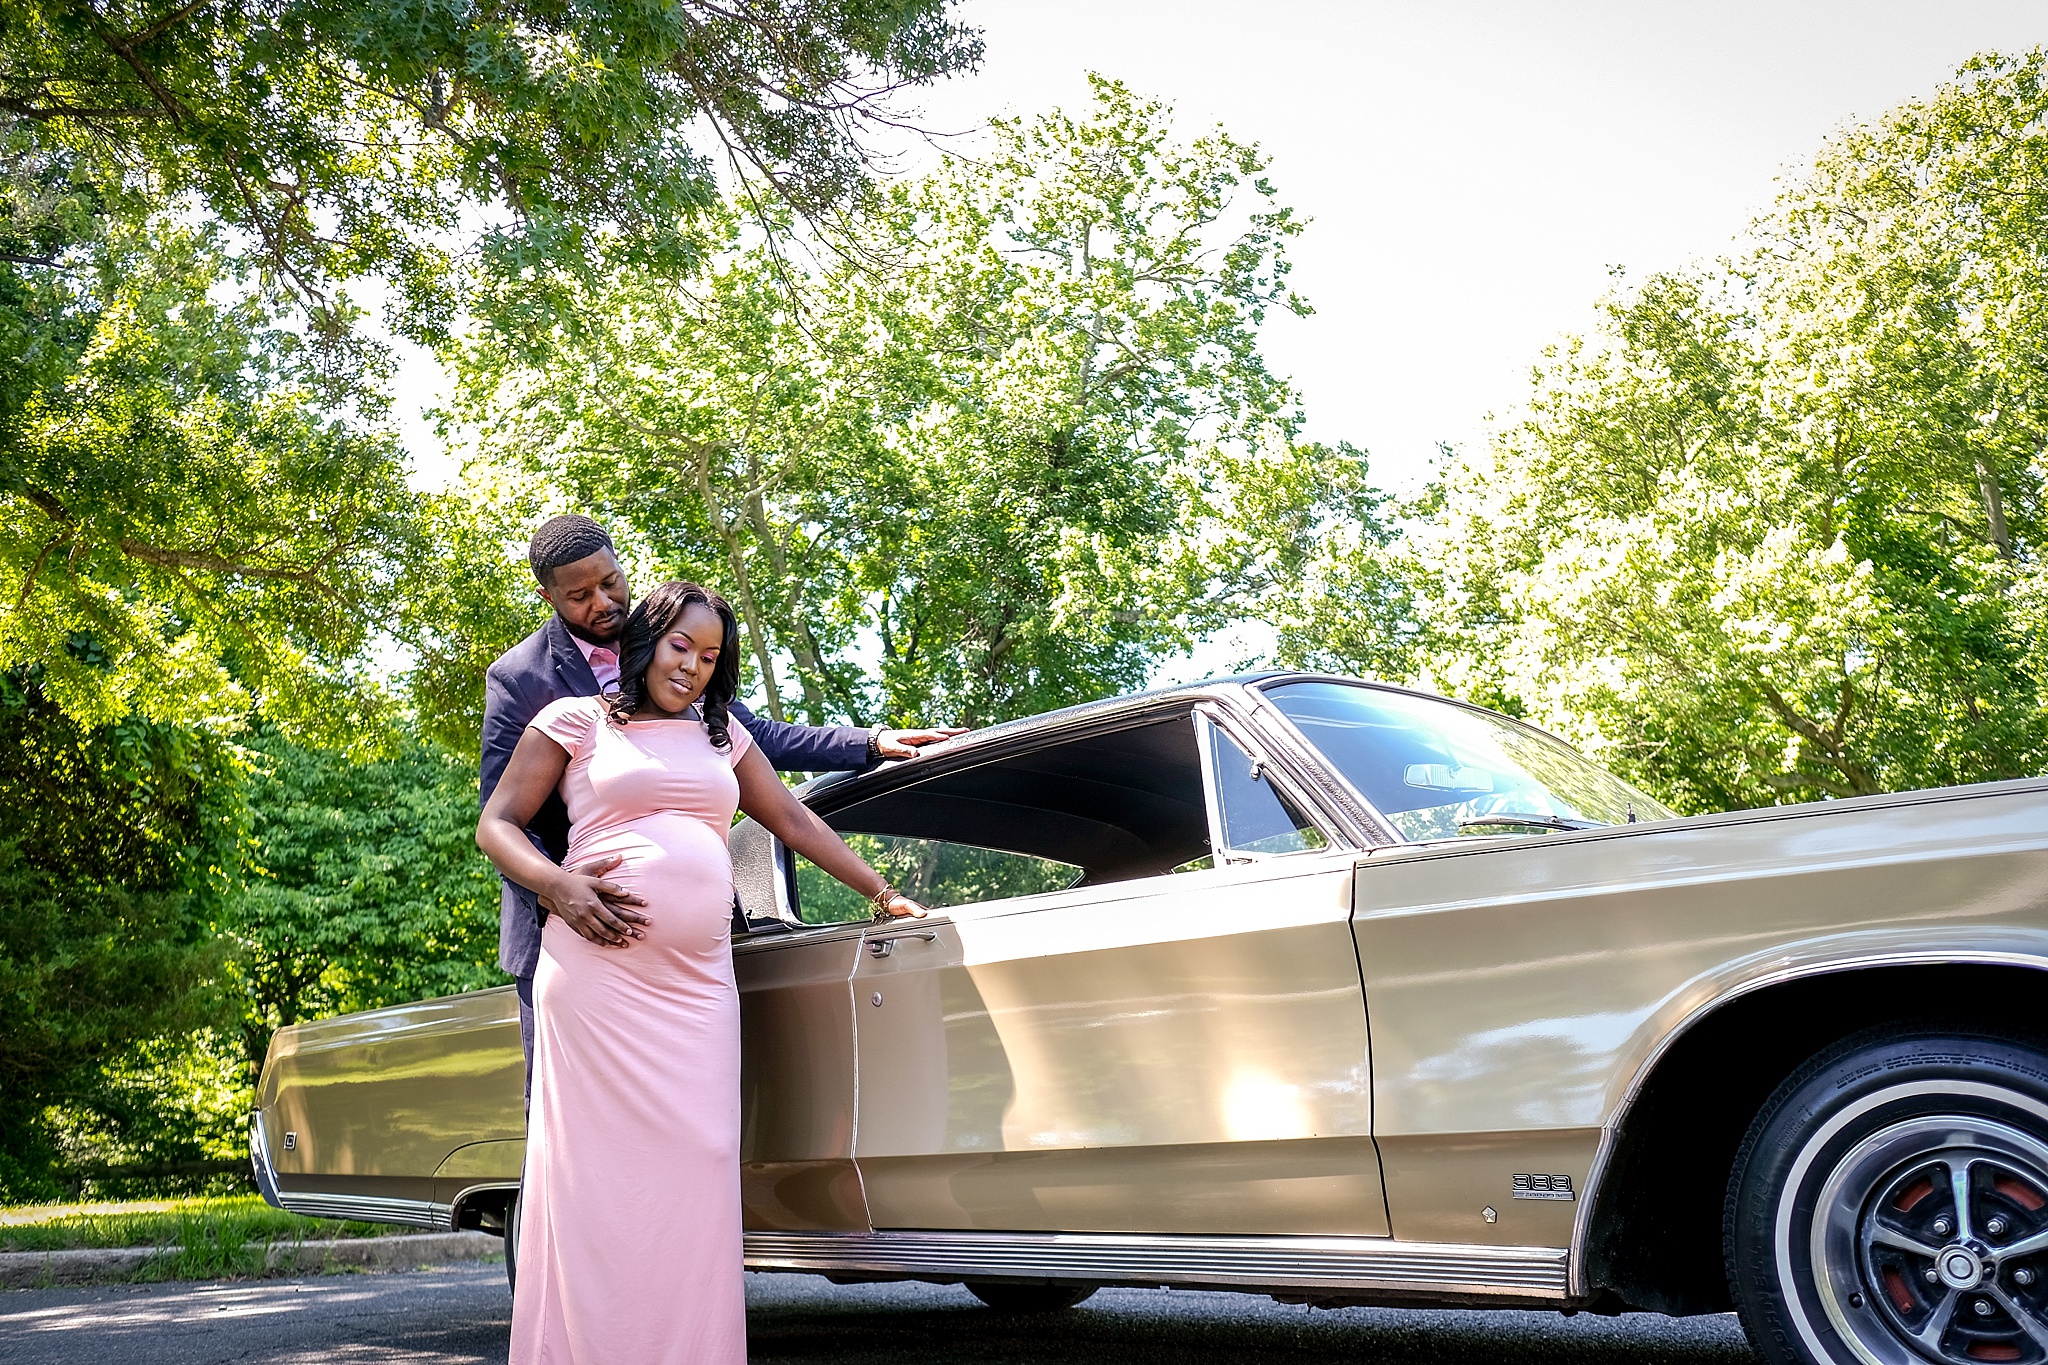 Damien-carter-photography-ft-washington-state-park-maternity-session-by-car